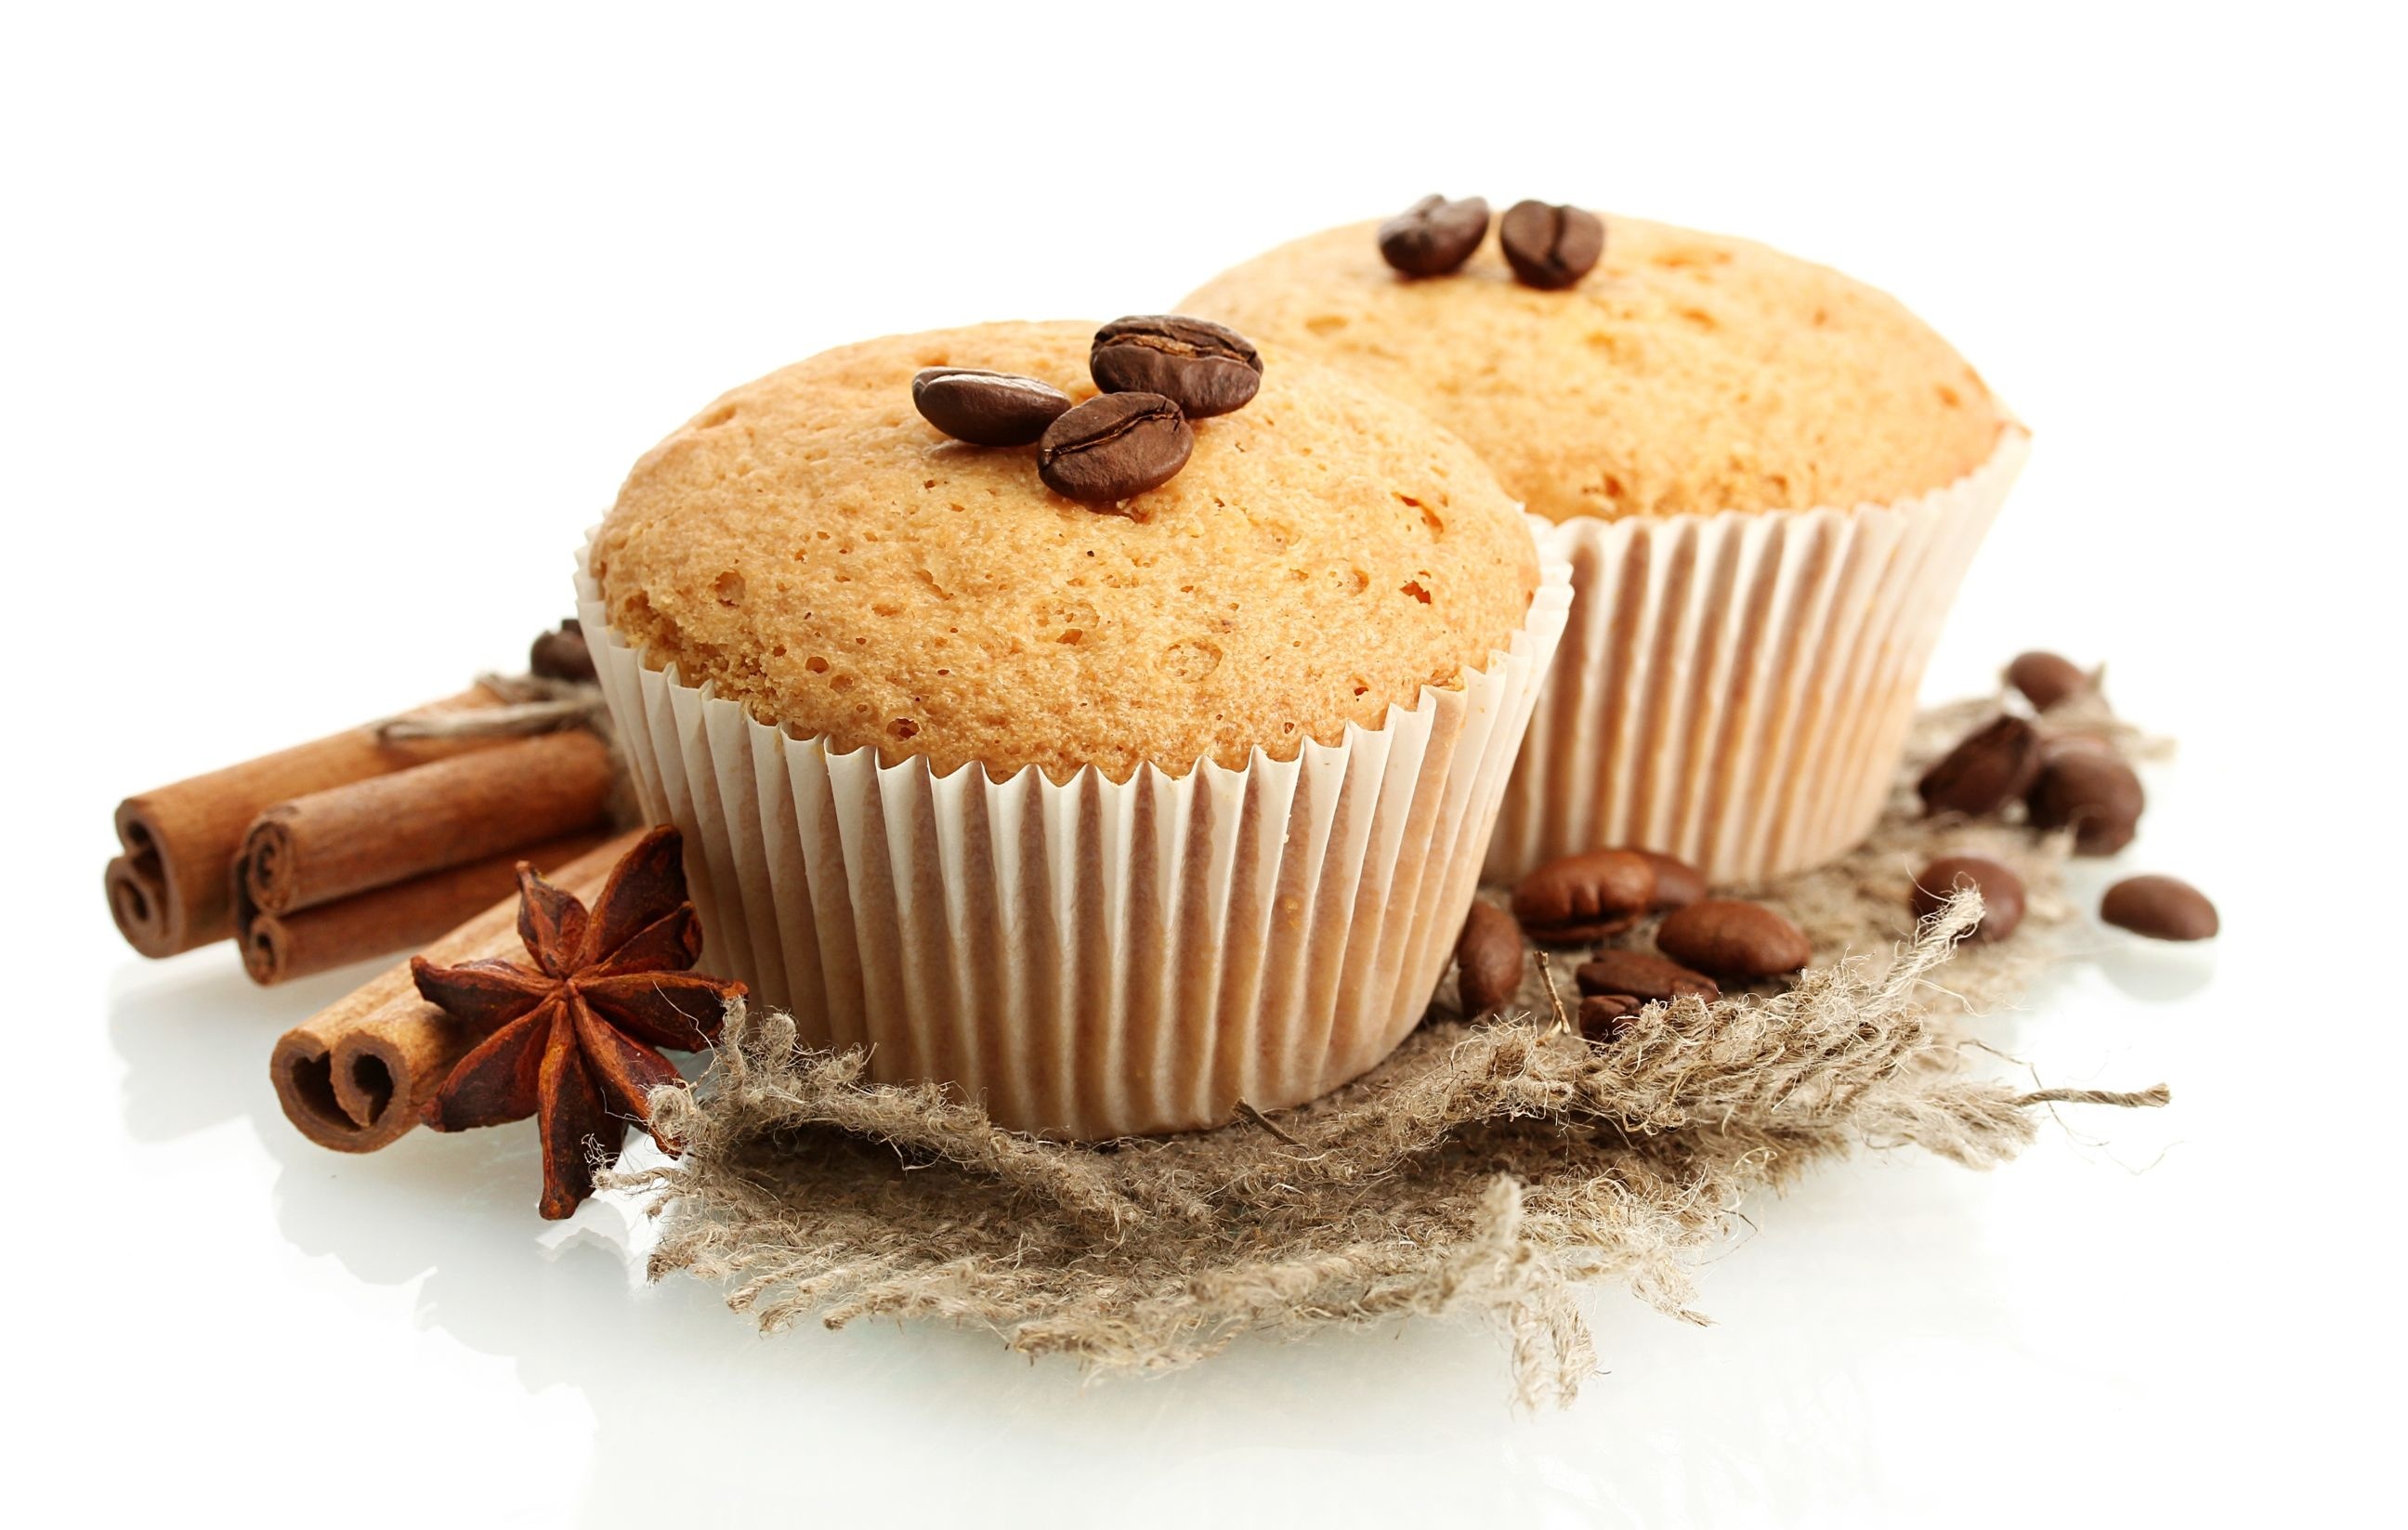 Muffin: A domed or peaked top and a slightly crumbly texture. 2600x1650 HD Wallpaper.